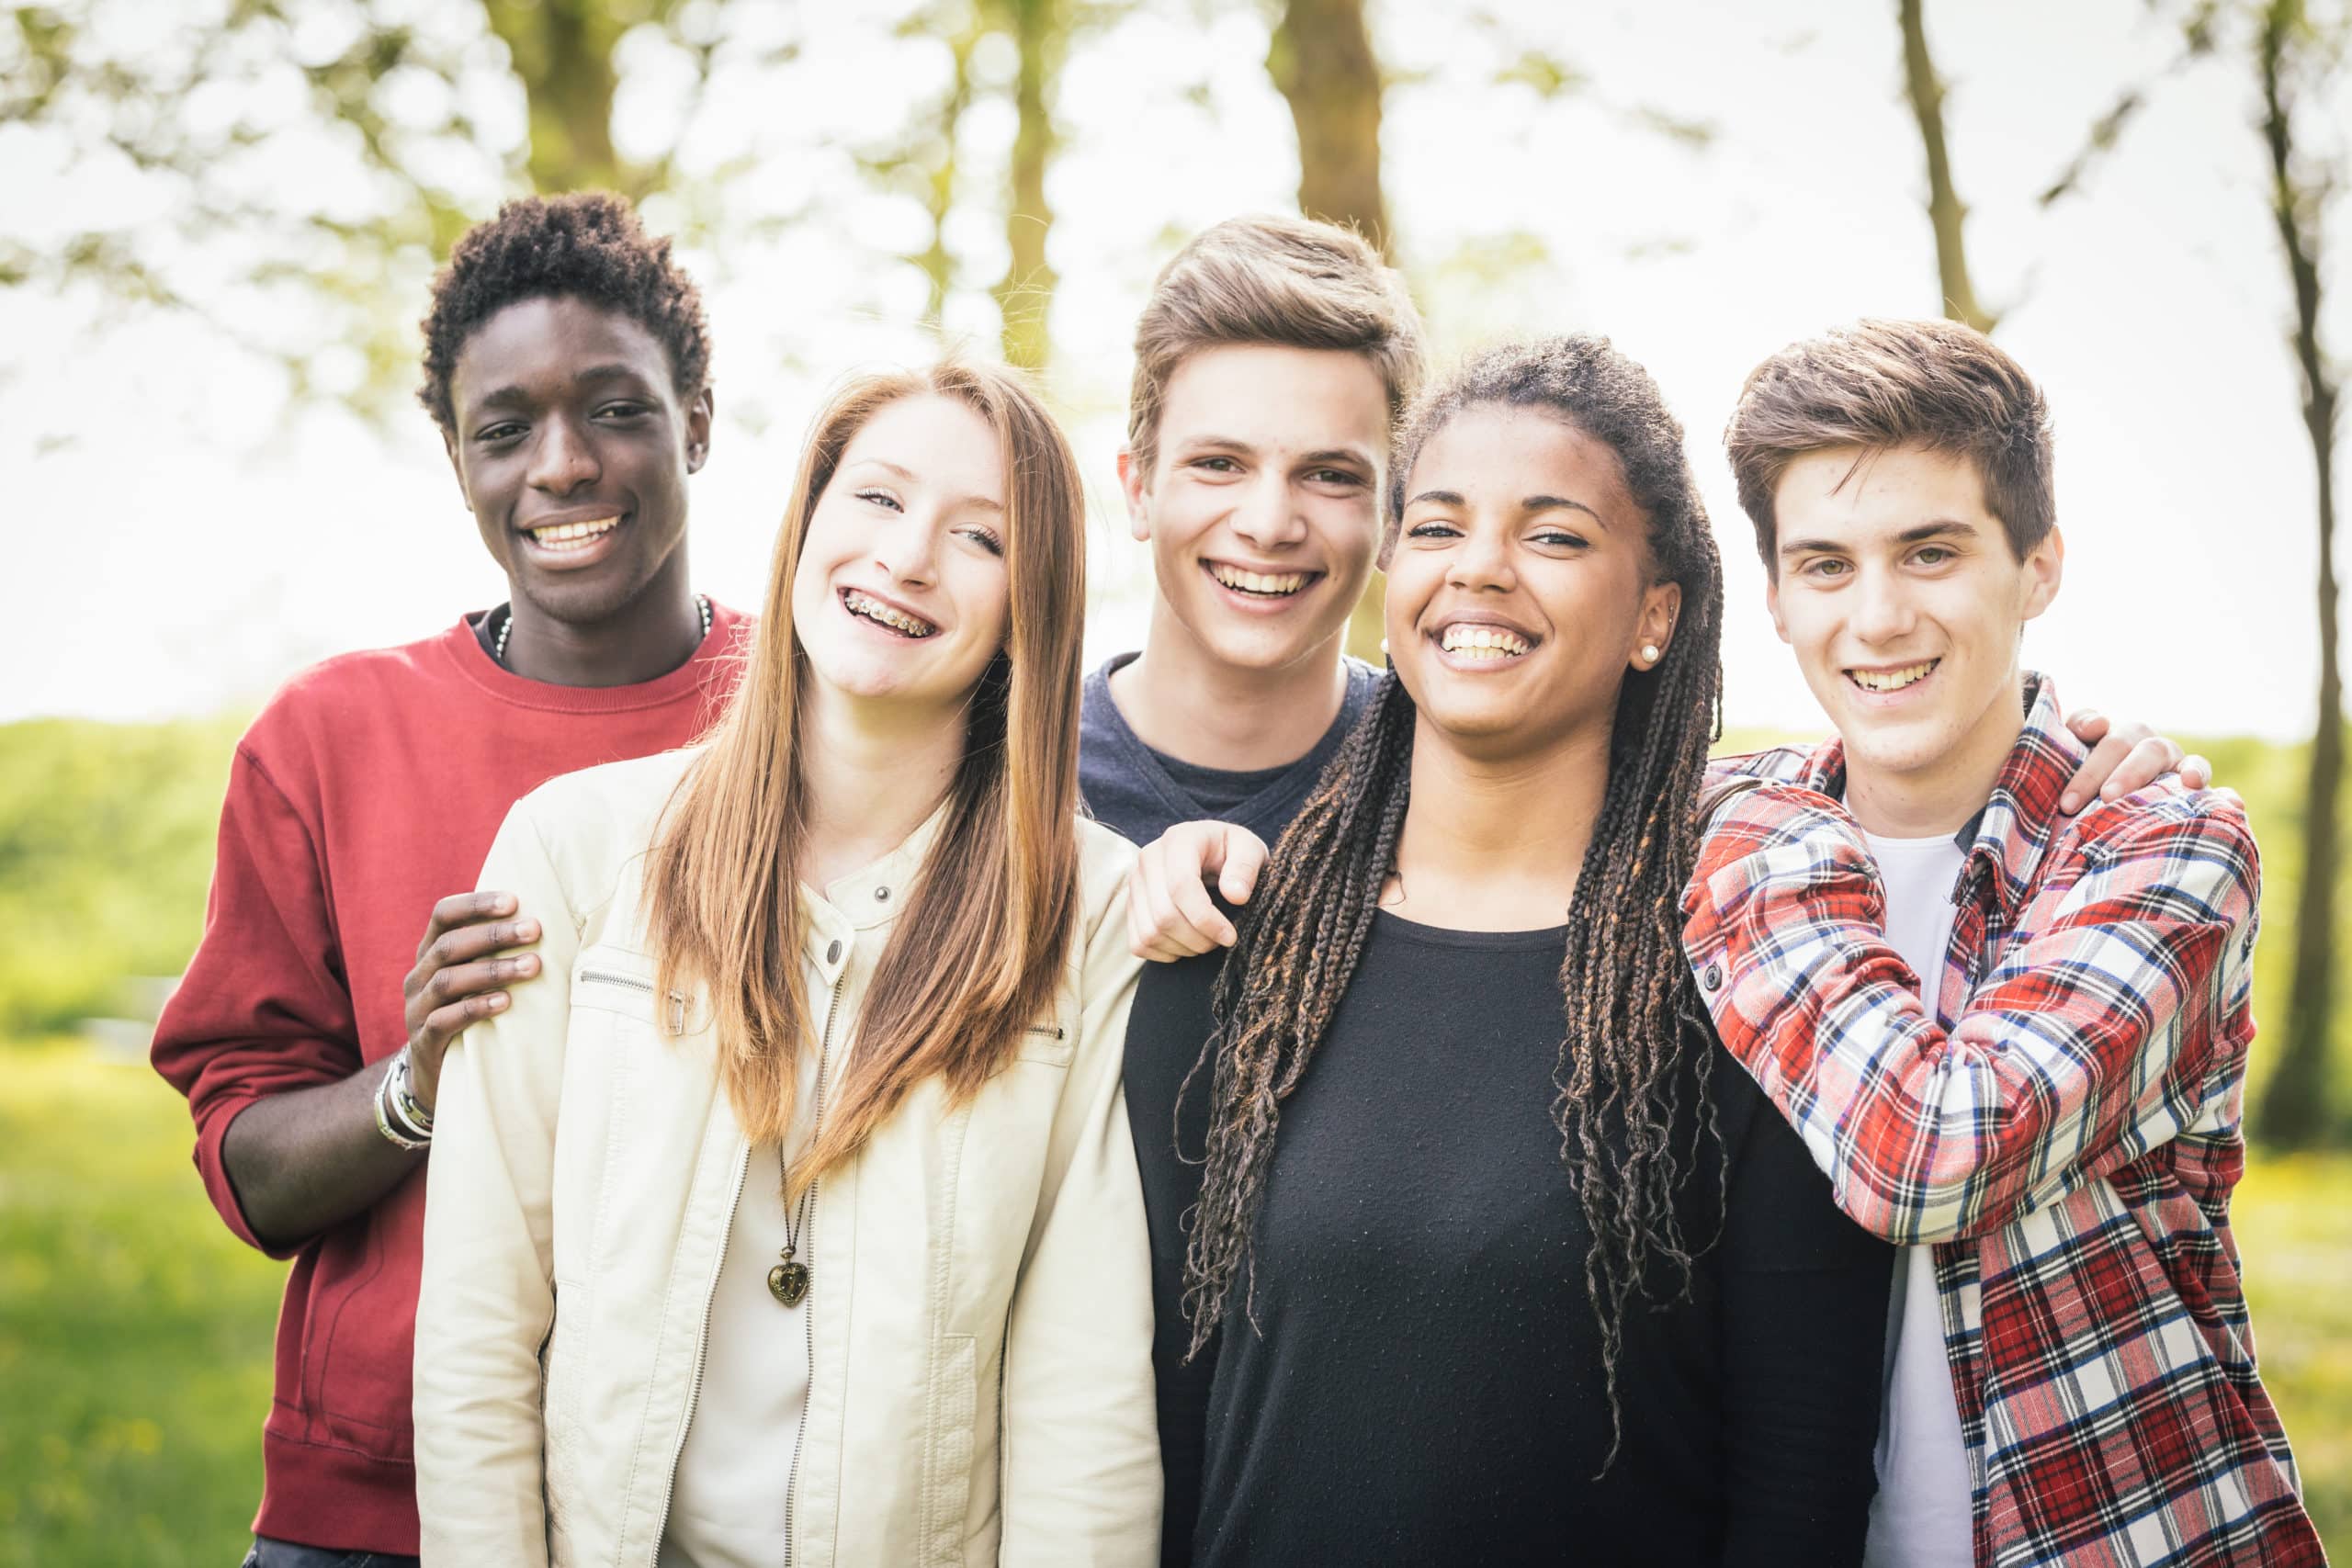 Multiethnic group of teenagers outdoor. They are embraced at park, two boys and one girl are caucasian, one boy and one girl are black. Friendship, immigration, integration and multicultural concepts.